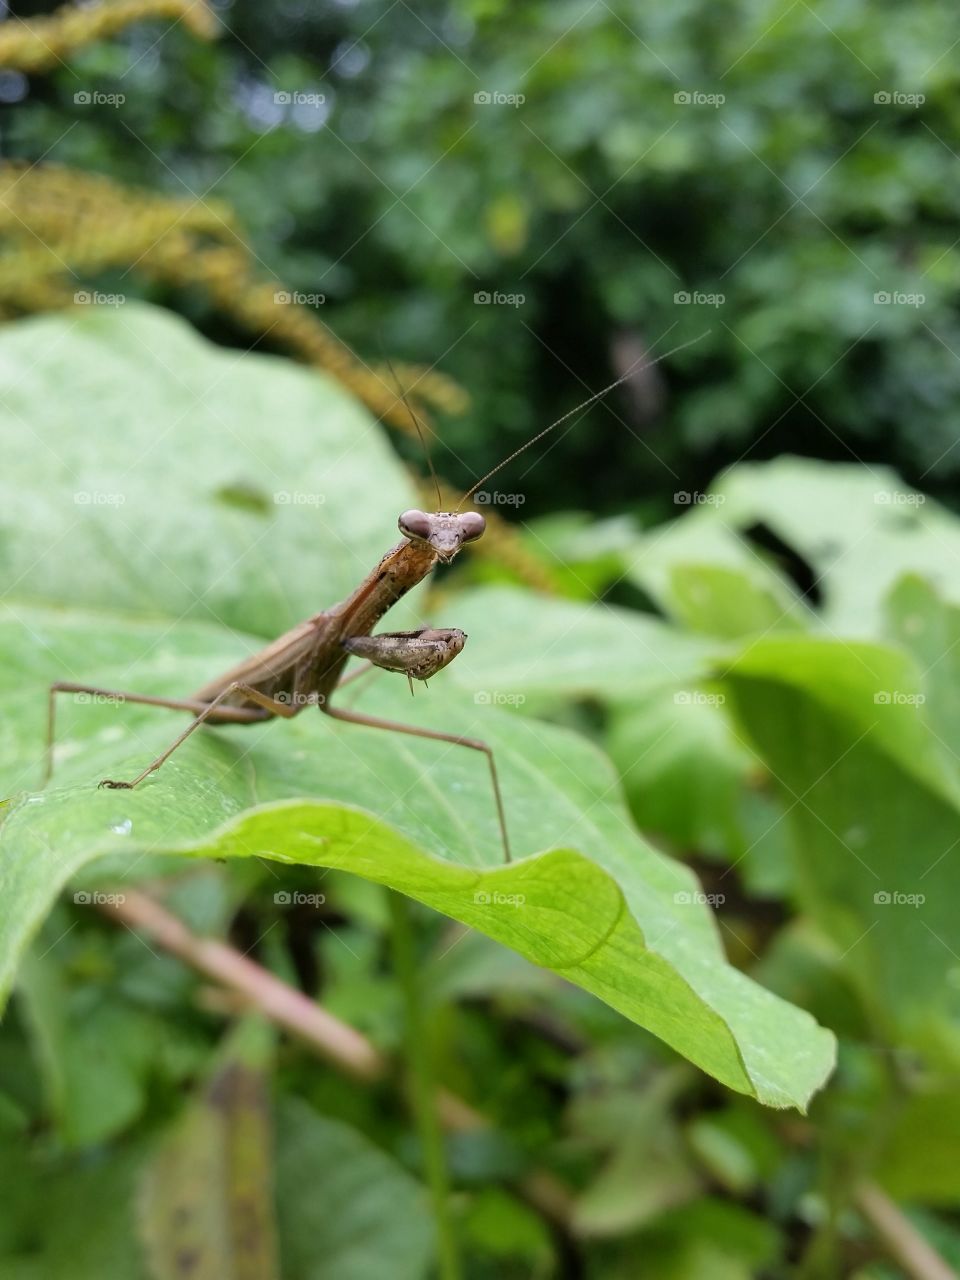 The brown mantis which stares at this